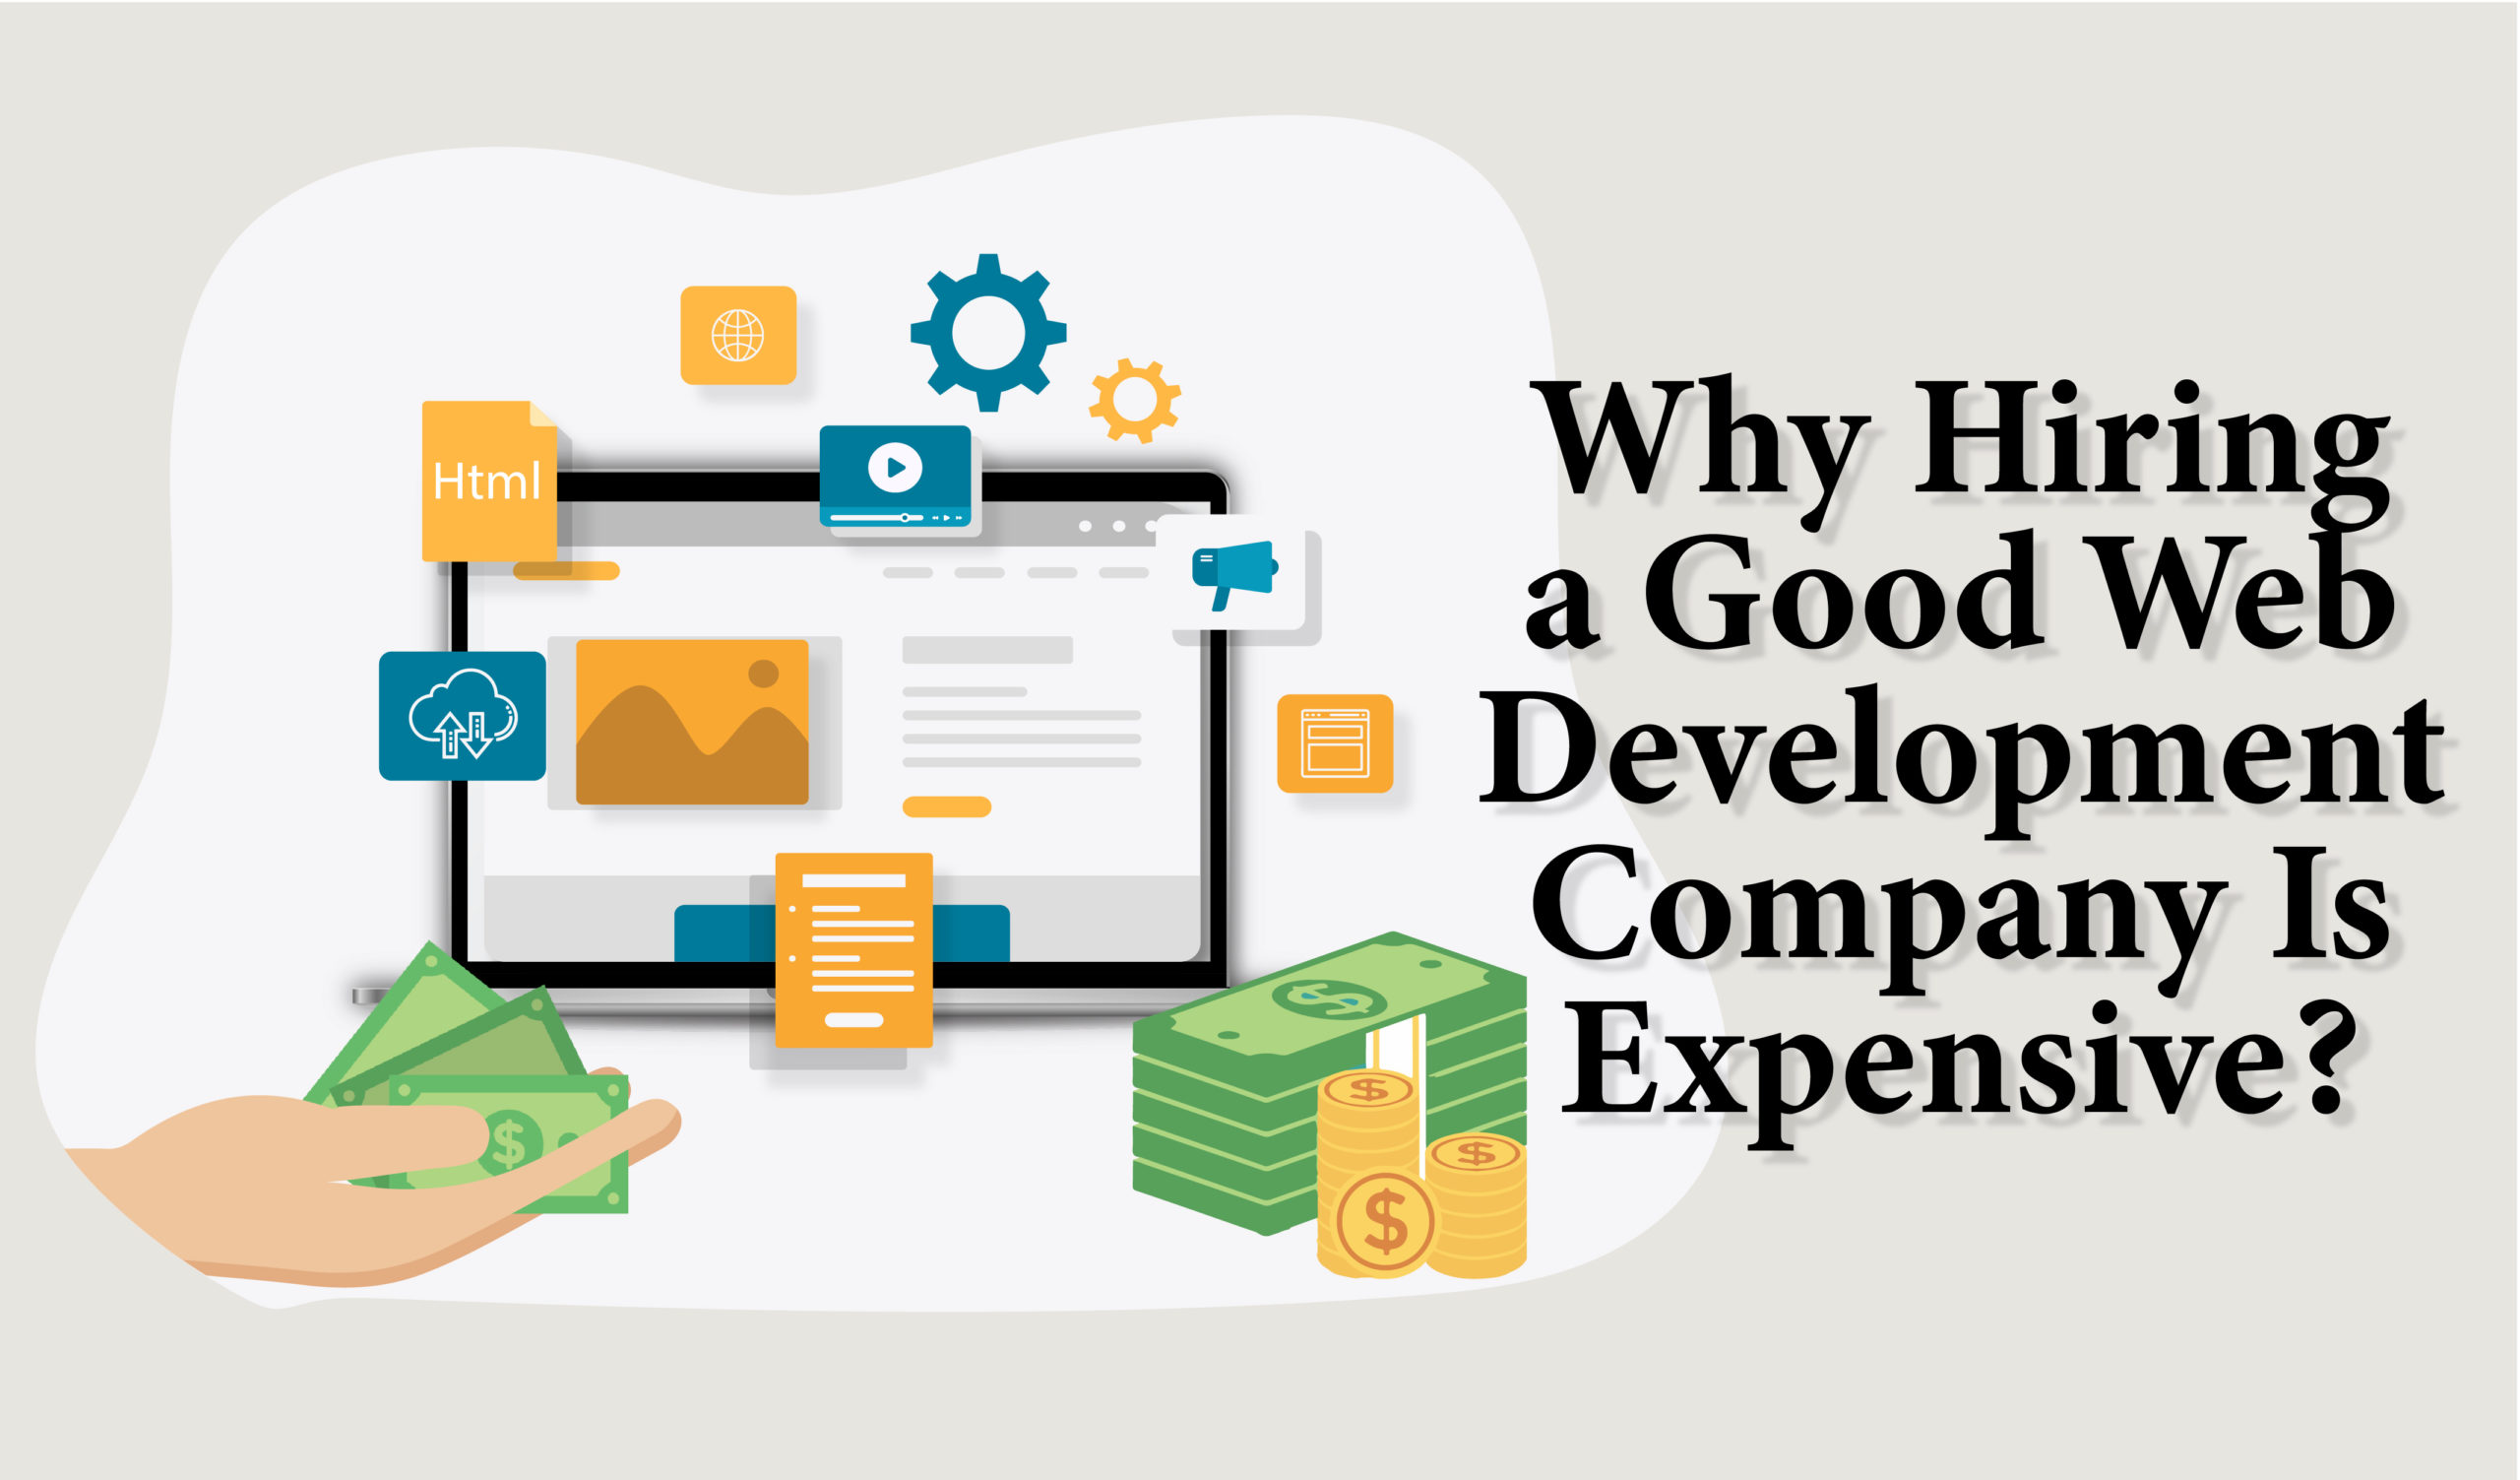 Why Hiring a Good Web Development Company Is Expensive?